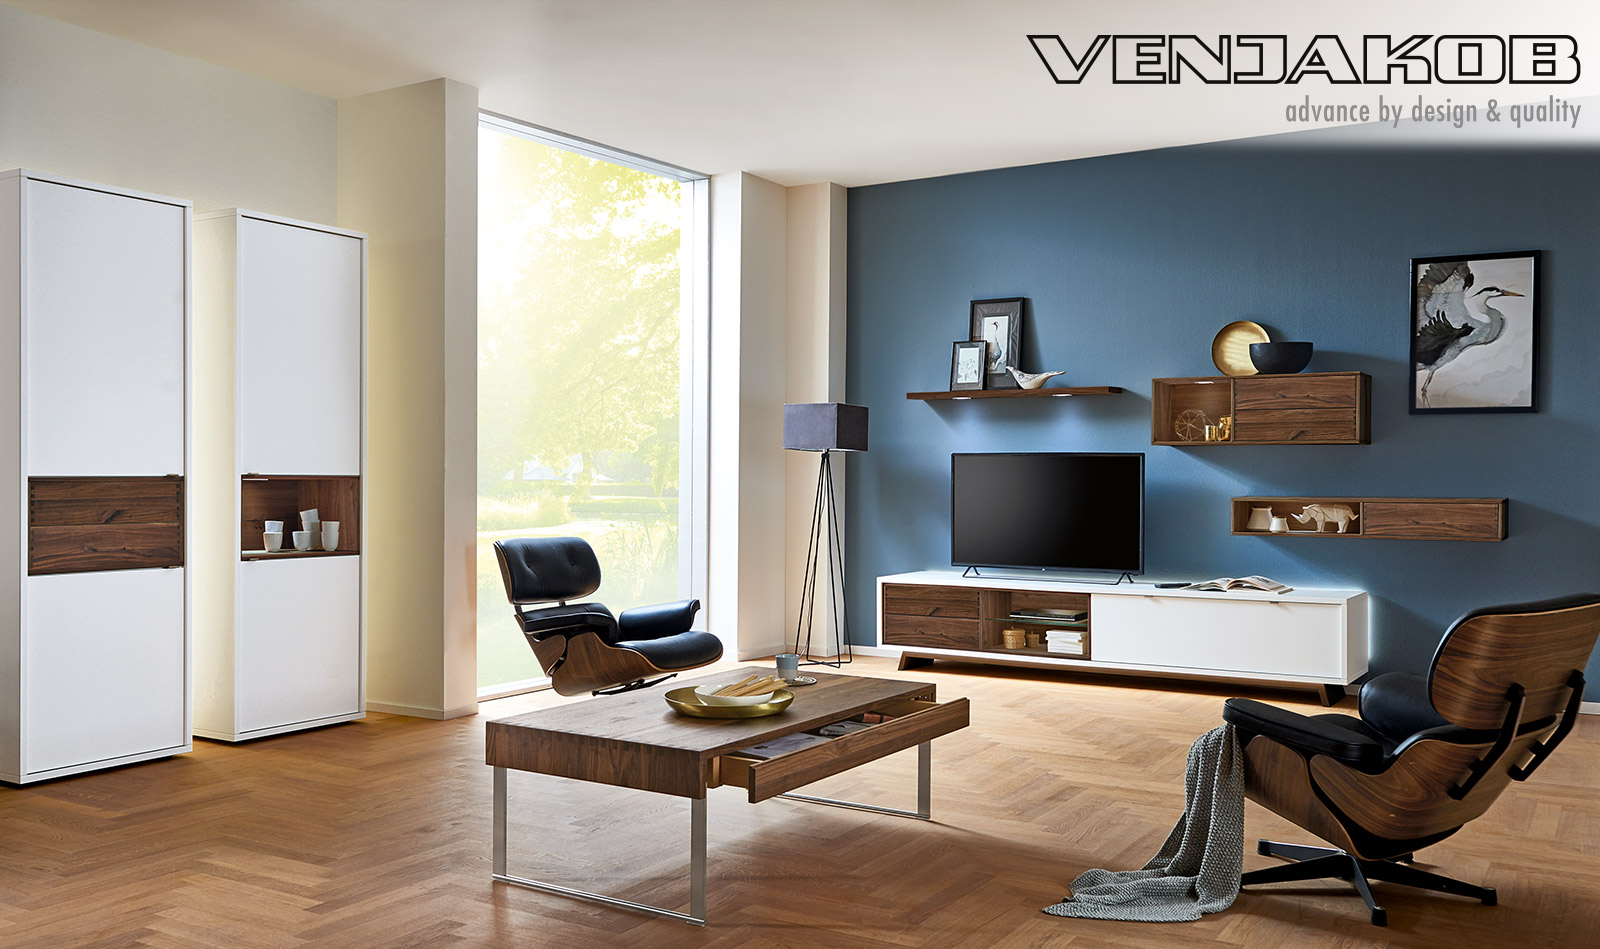 Venjakob macao Living Collection